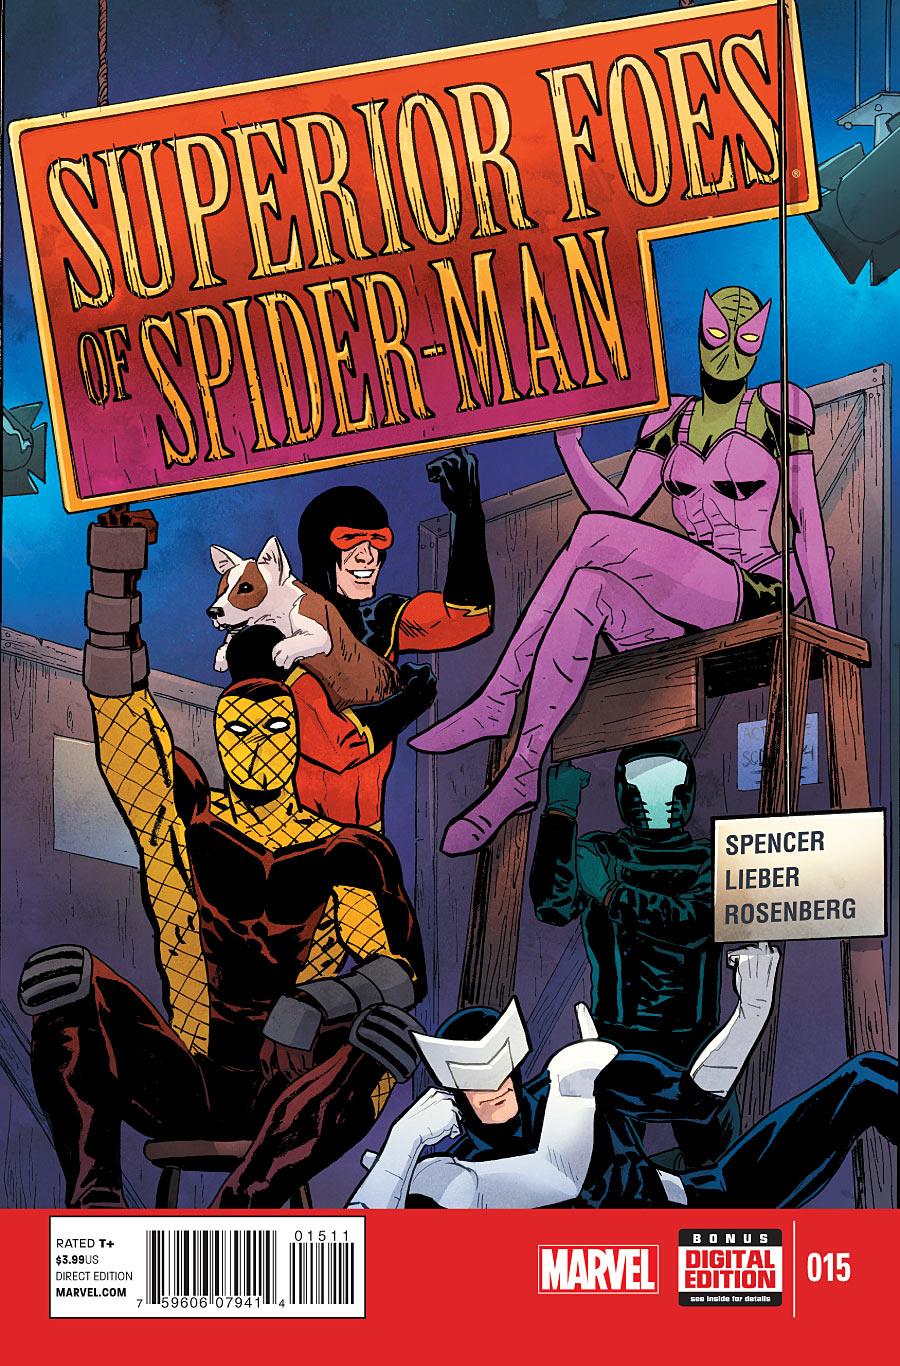 The Superior Foes of Spider-Man Vol. 1 #15